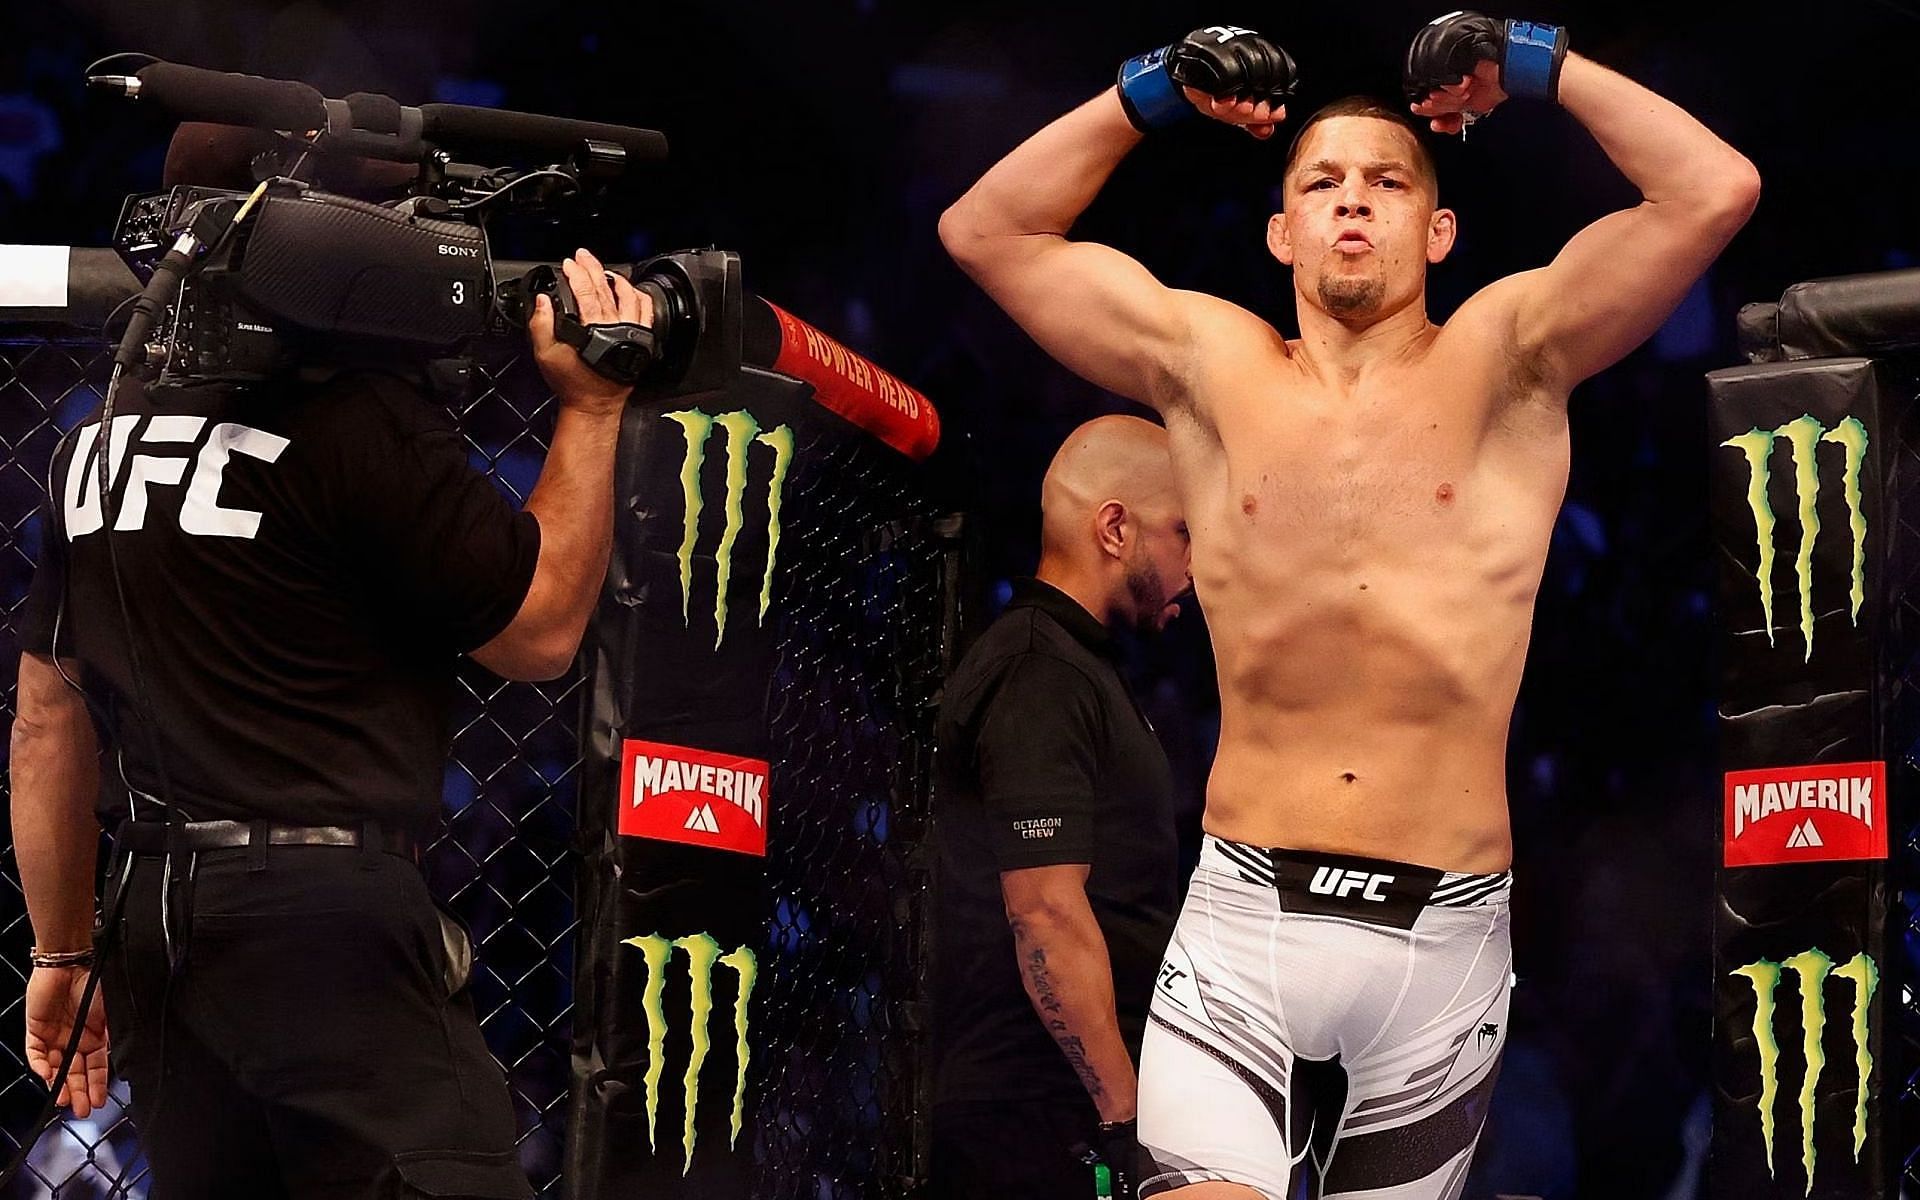 Nate Diaz is now free of his UFC contract, but should he return to the promotion?